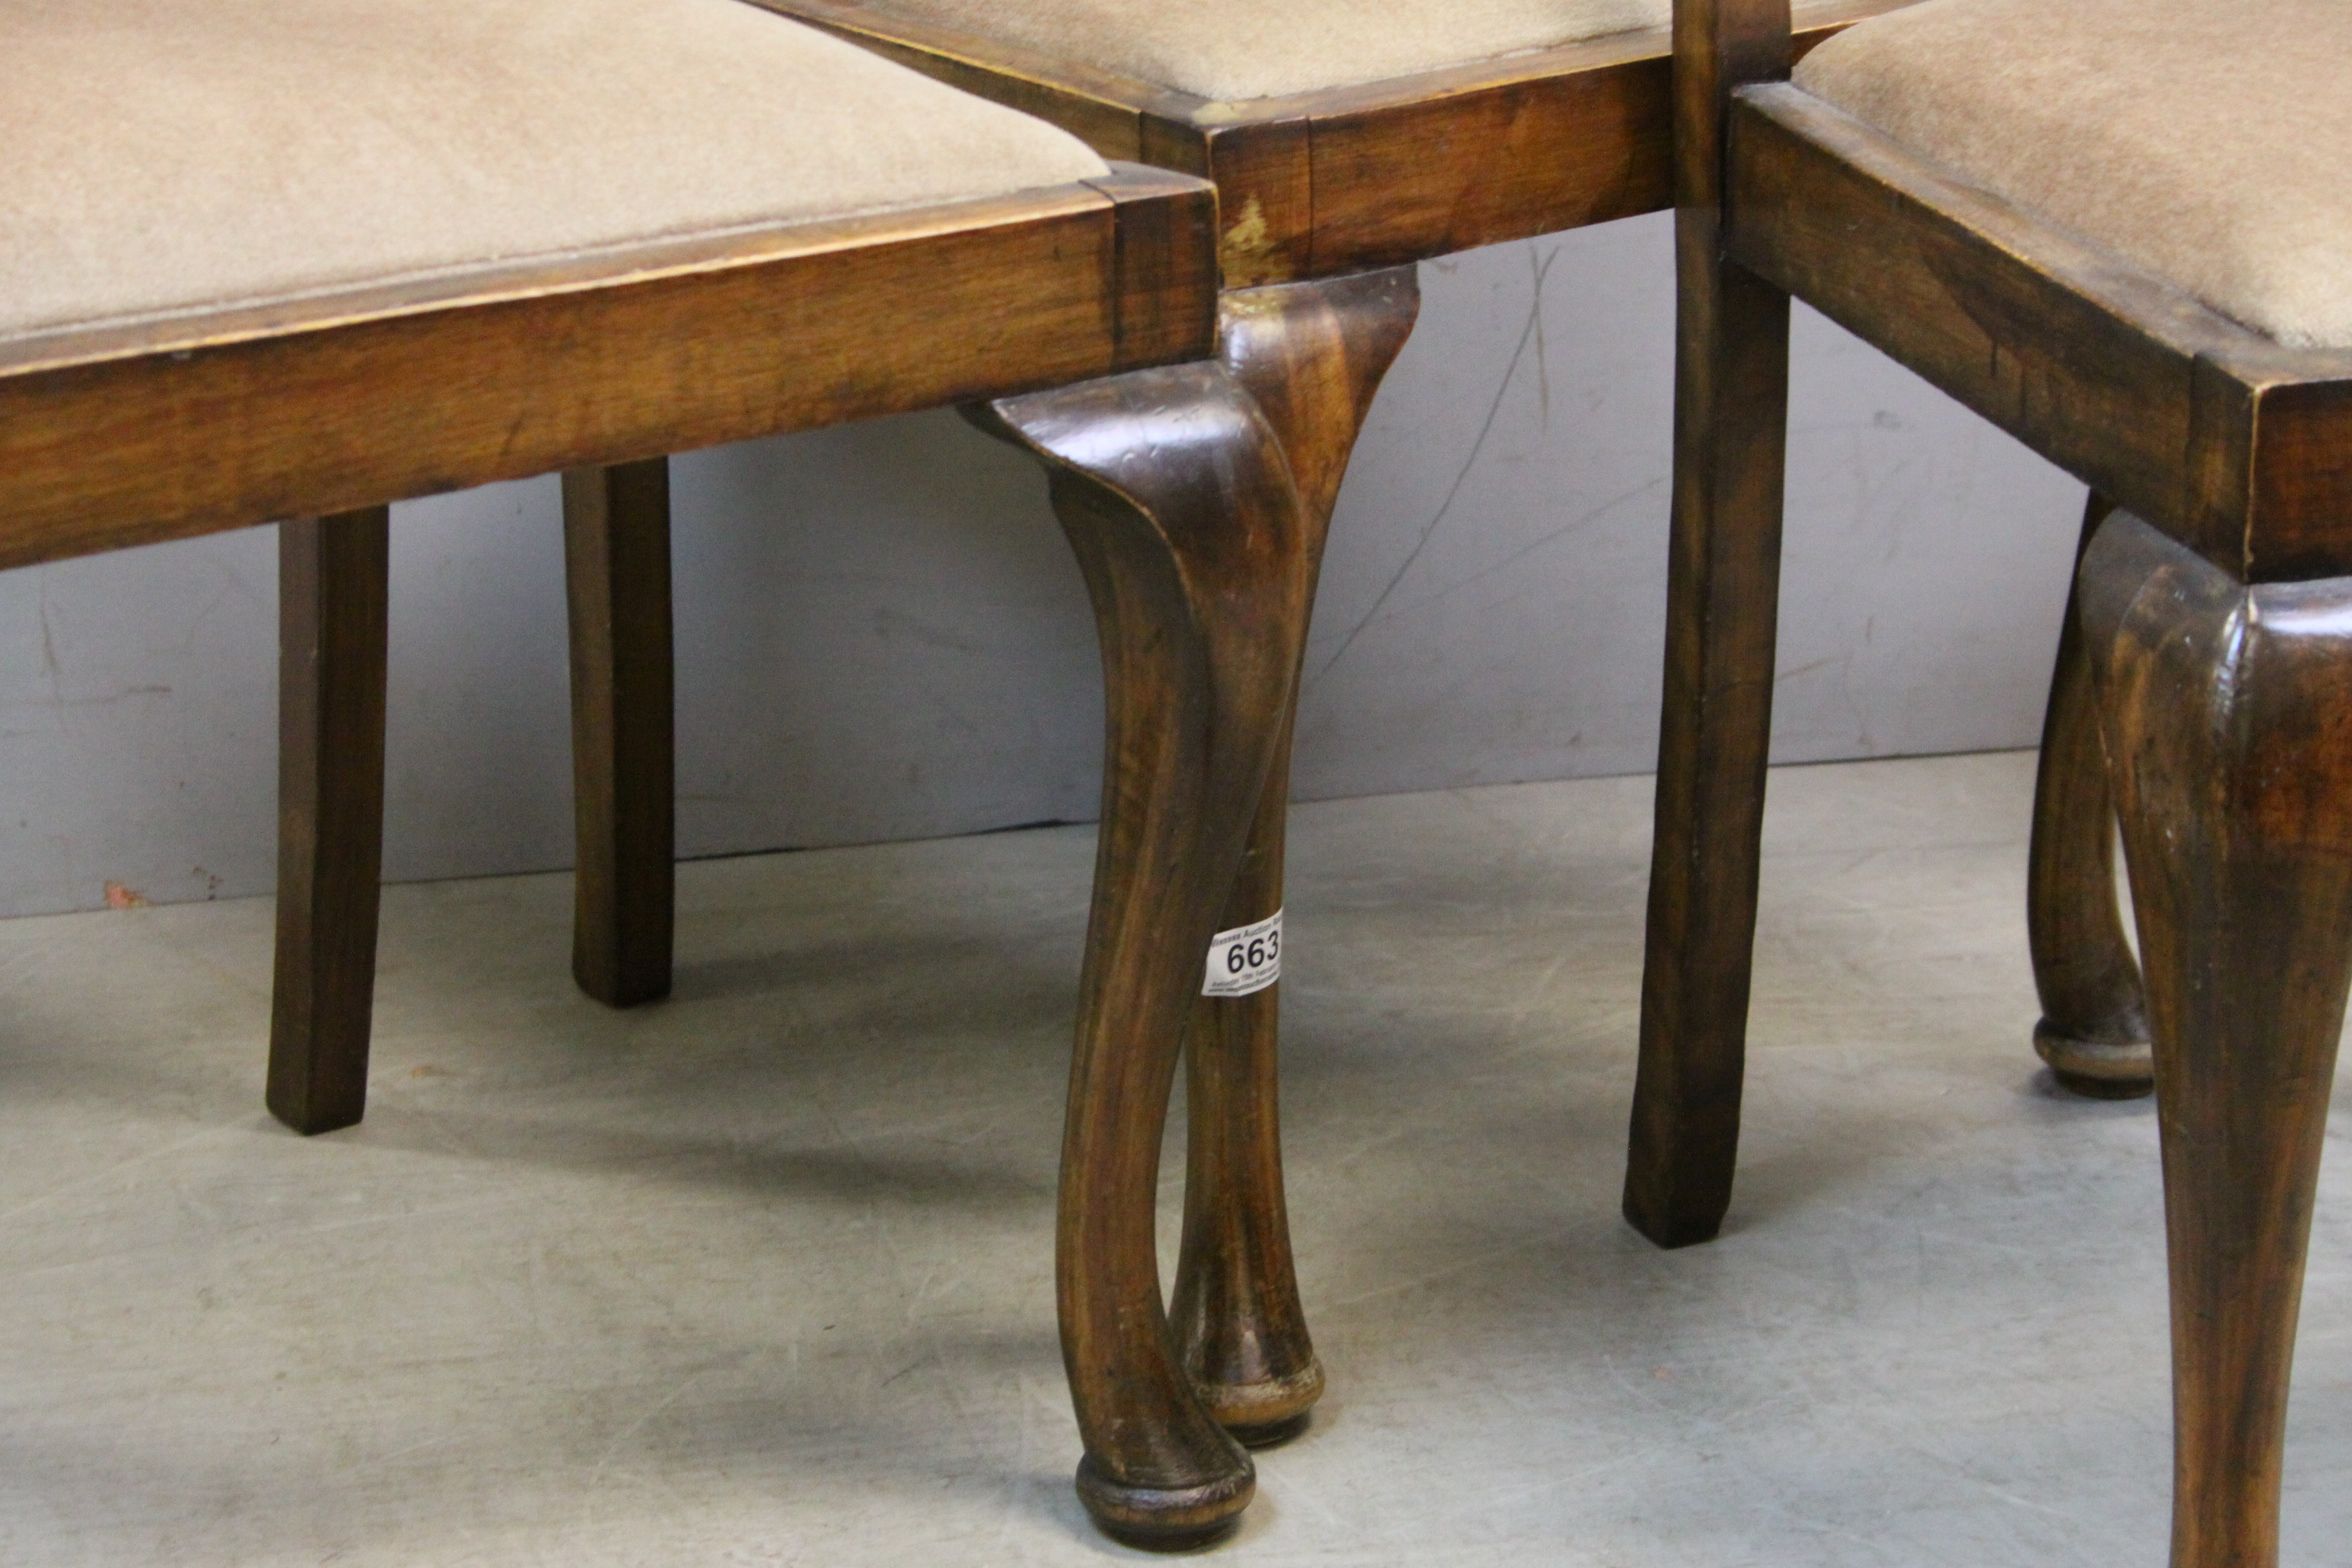 Set of Four Early 20th century Dining Chairs with Floral Inlaid and Pierced Splats, Drop in Seats - Image 3 of 5